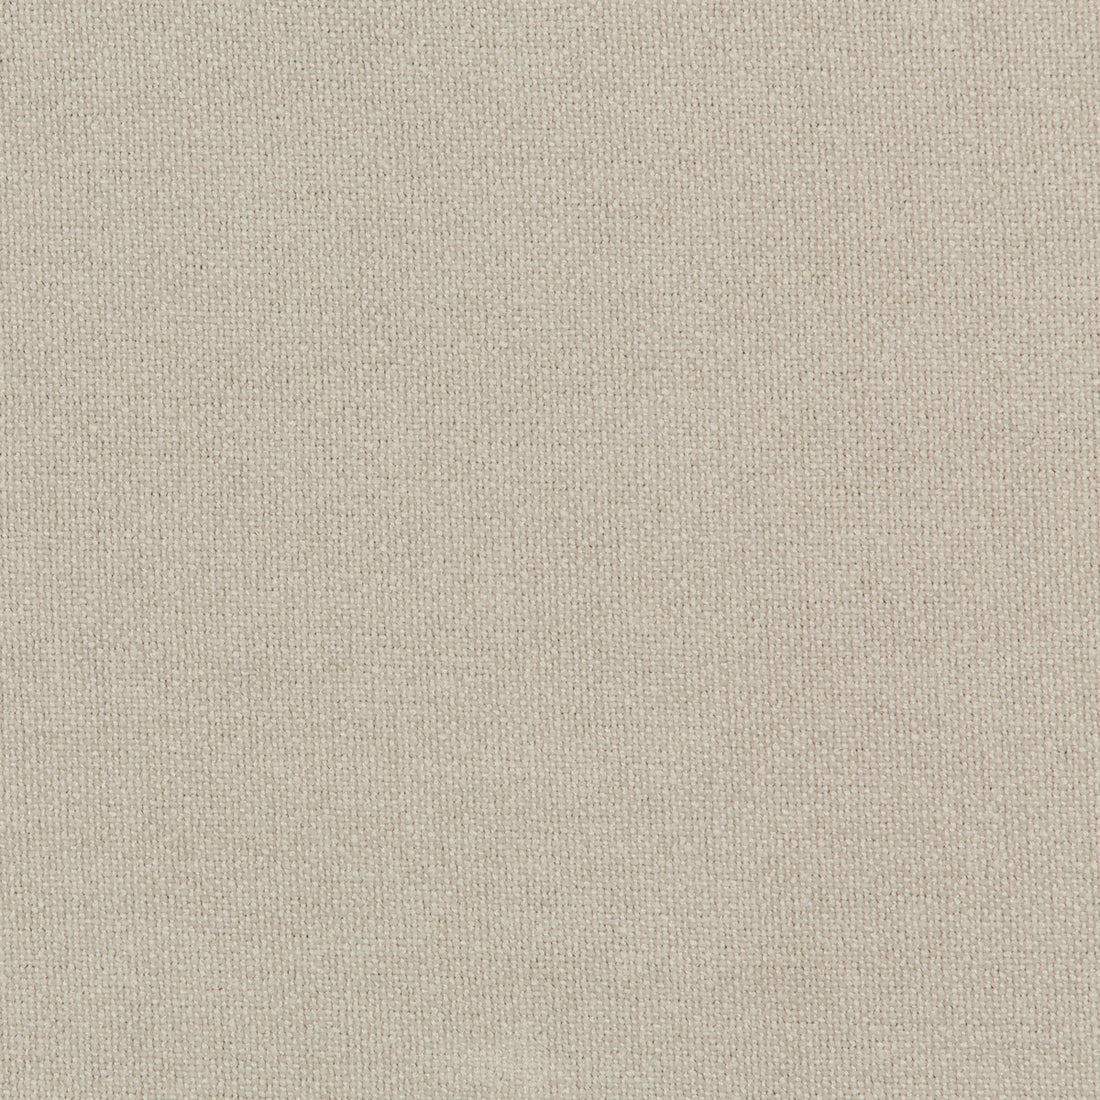 Kravet Smart fabric in 35988-11 color - pattern 35988.11.0 - by Kravet Smart in the Performance Crypton Home collection